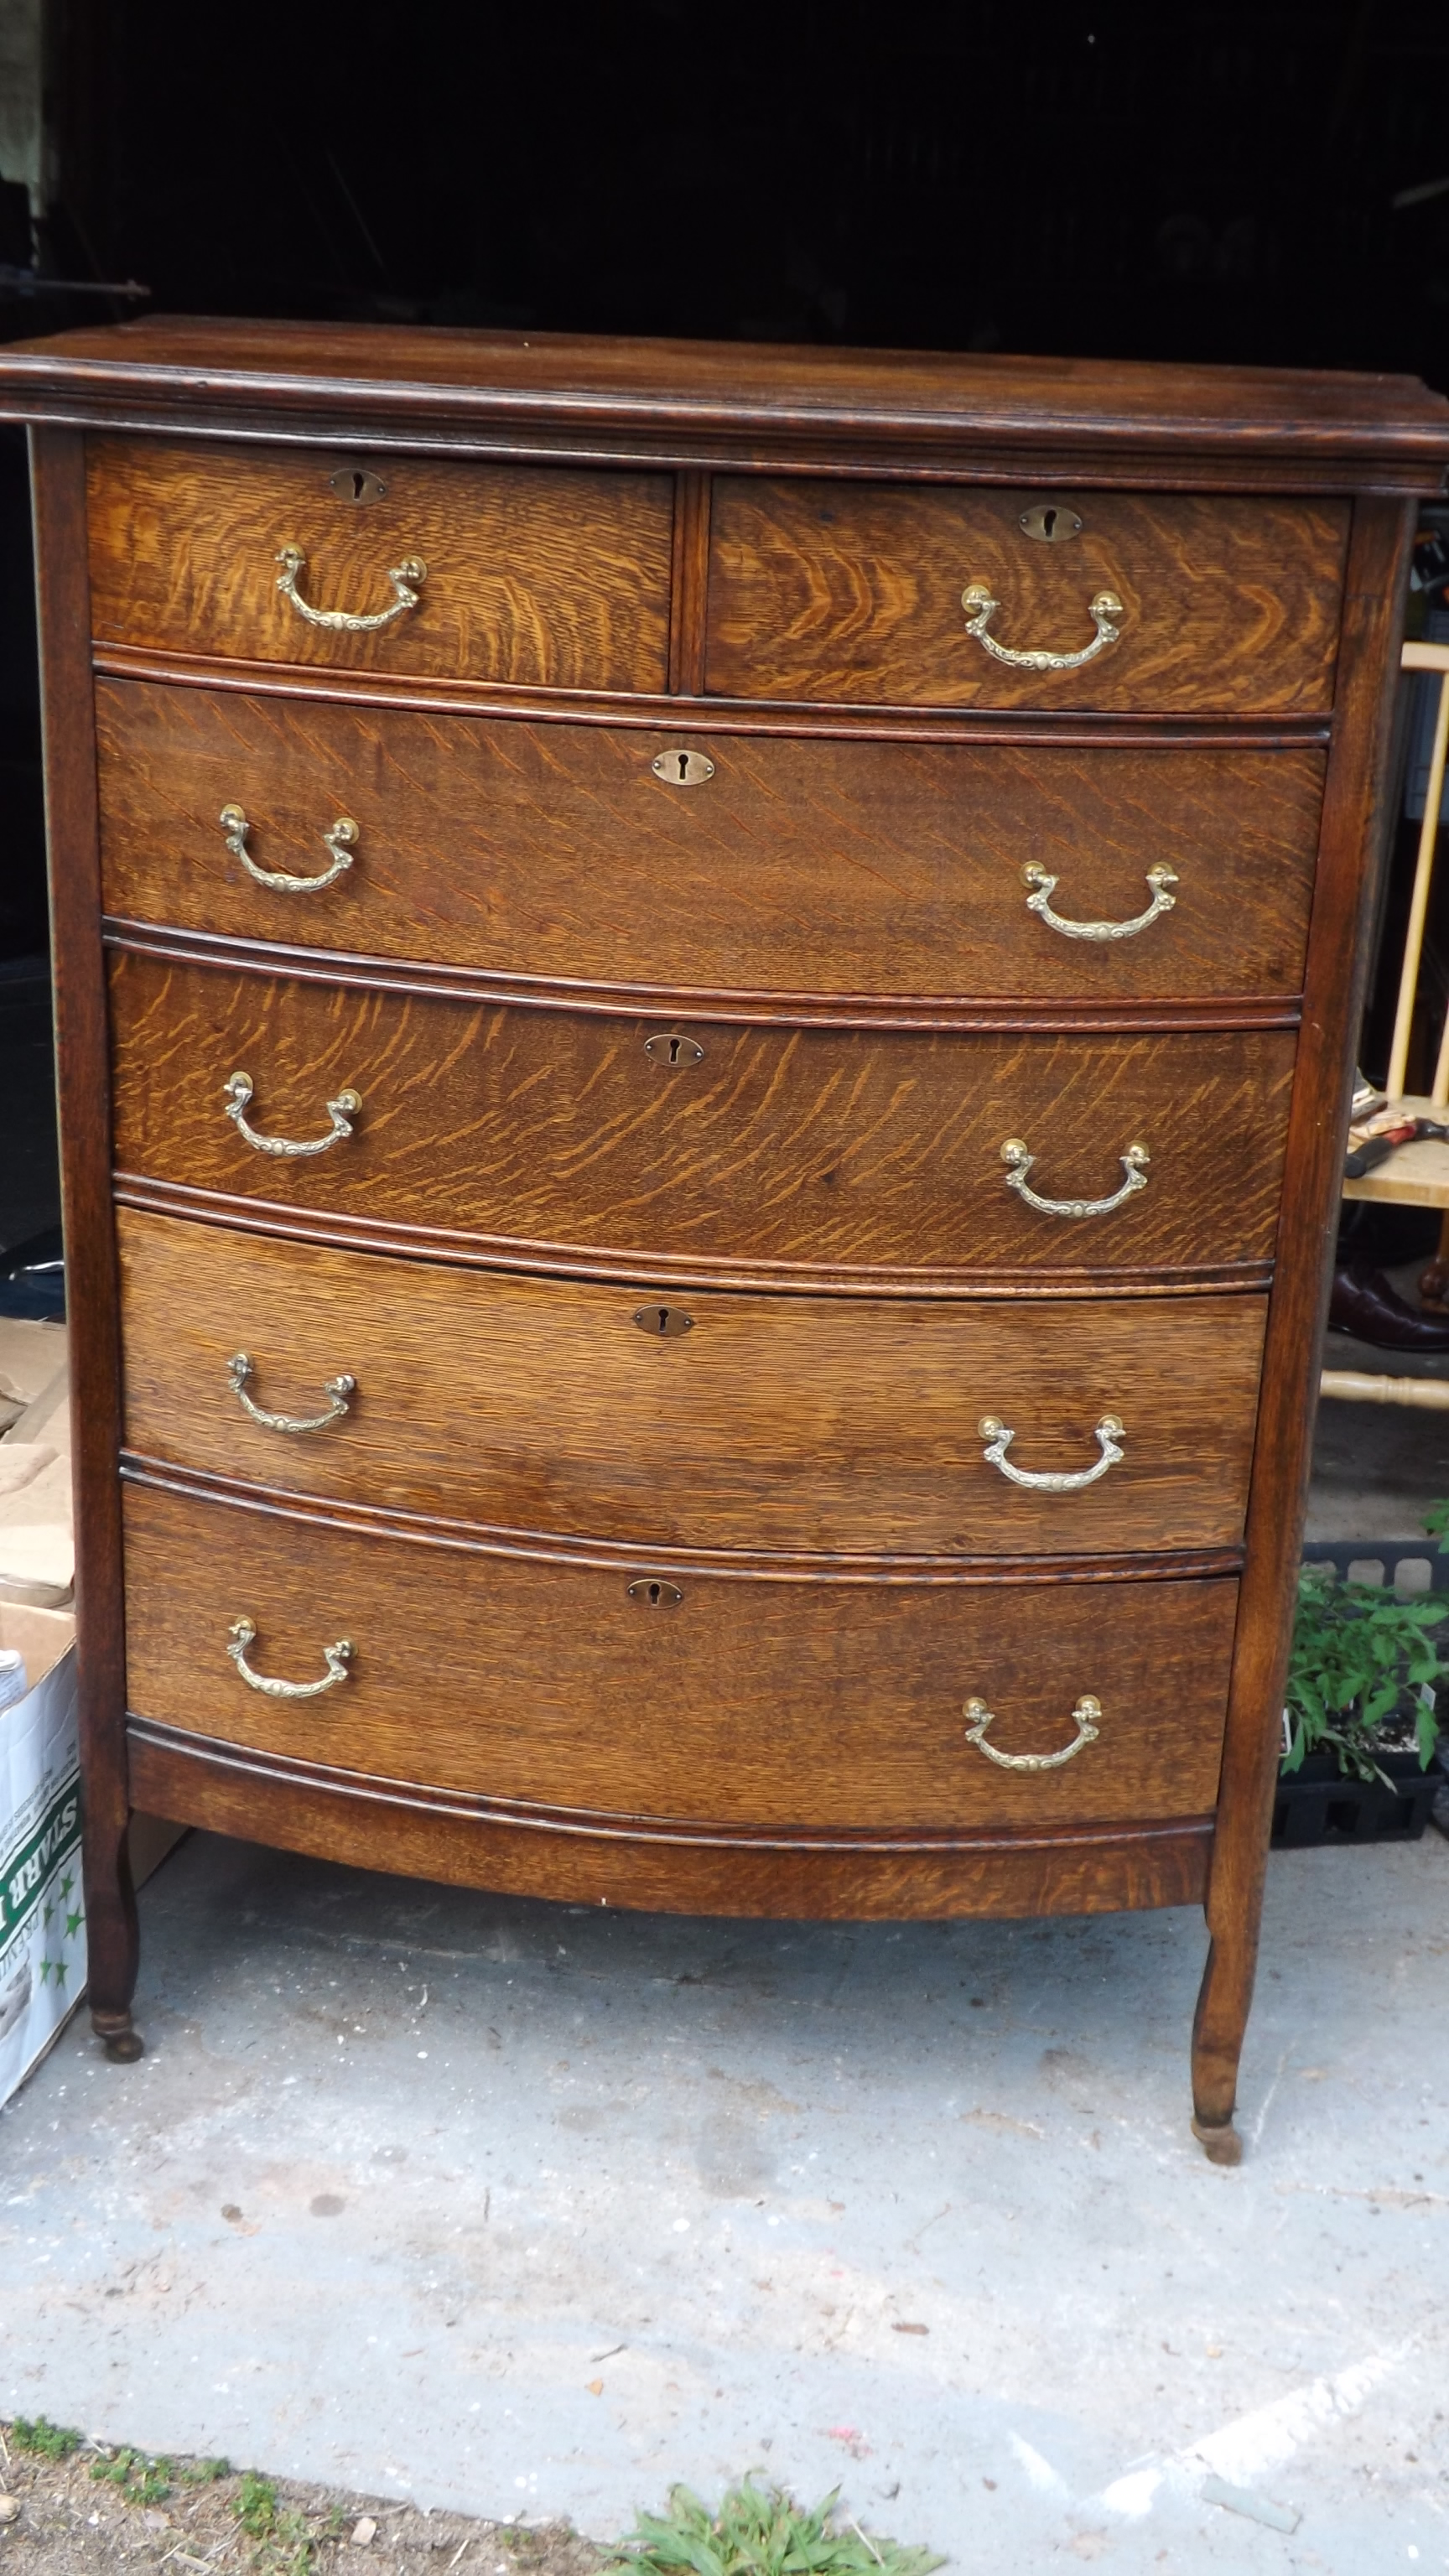 Ebay Sales Tiger S Oak Dresser Chest Of Drawers Found Fixed